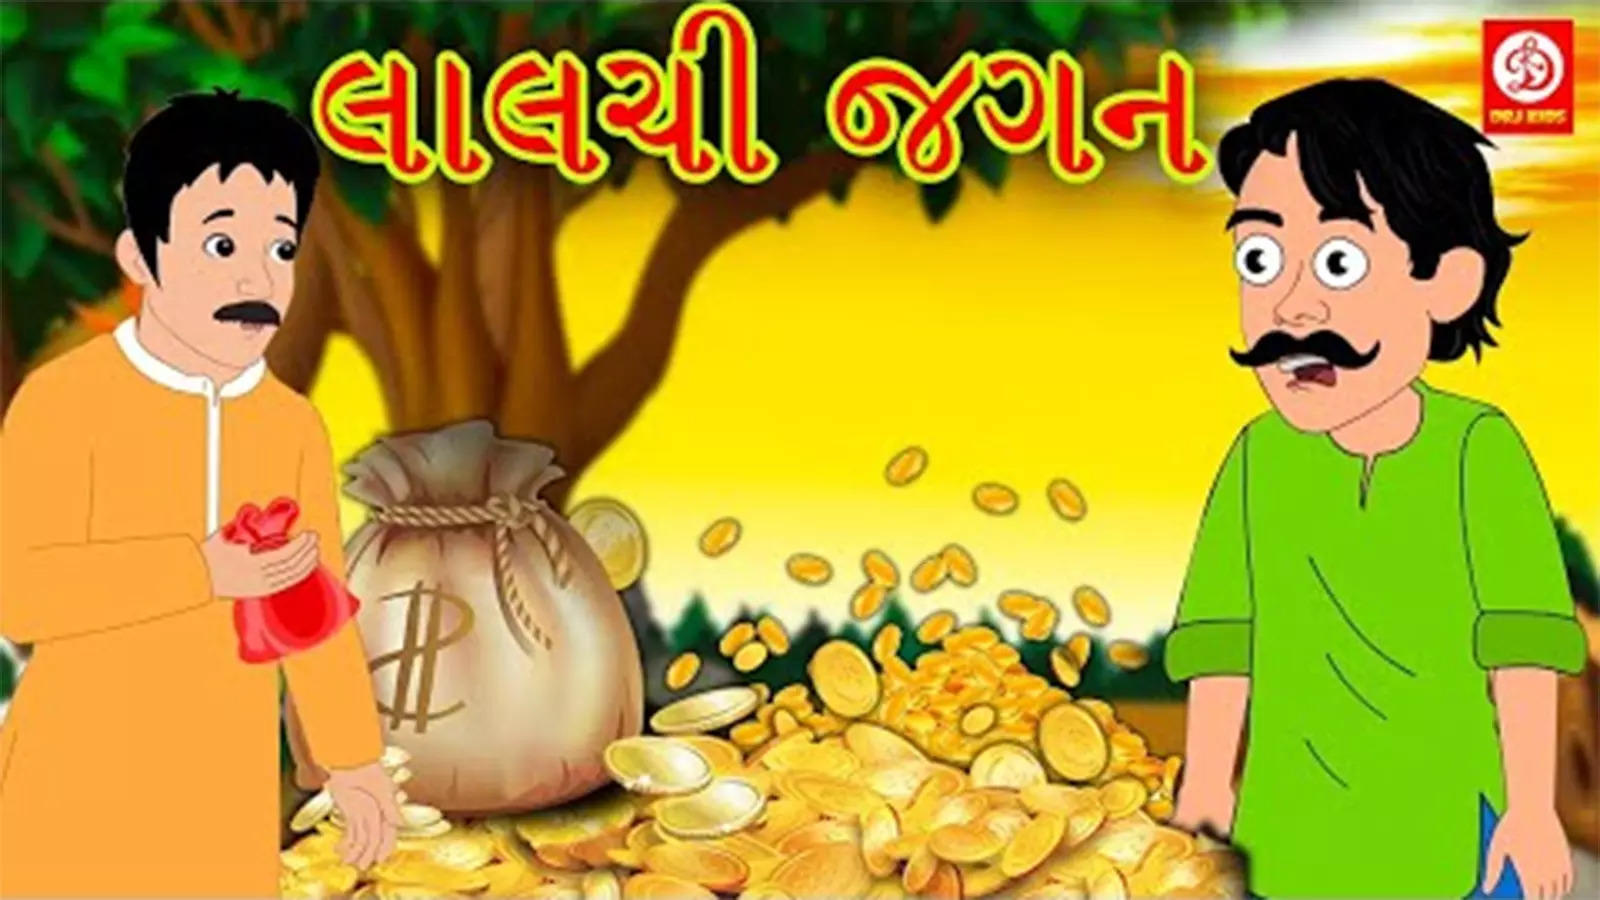 Watch Popular Children Gujarati Story 'Lalchi Jagan' For Kids - Check Out  Kids's Nursery Rhymes And Baby Songs In Gujarati | Entertainment - Times of  India Videos